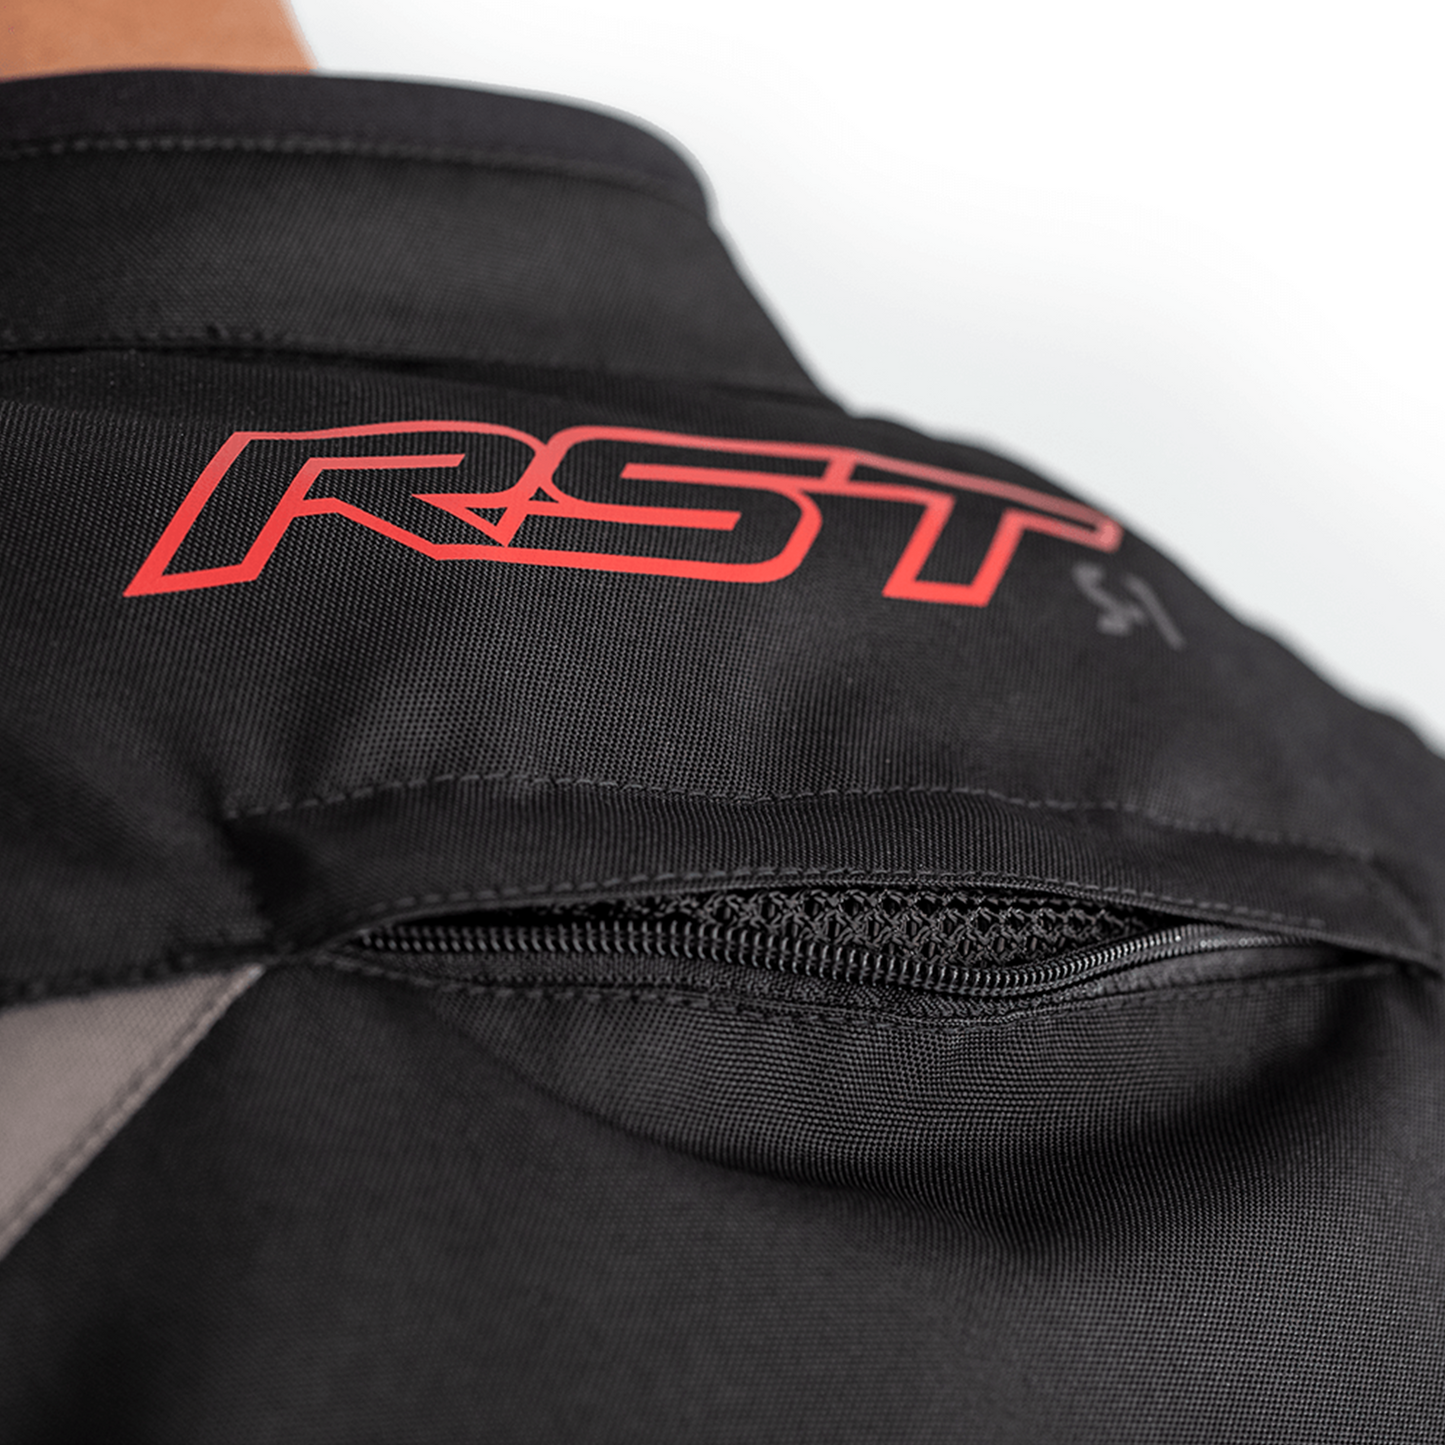 RST S1 (CE) Textile Jacket - Grey Red (2559)